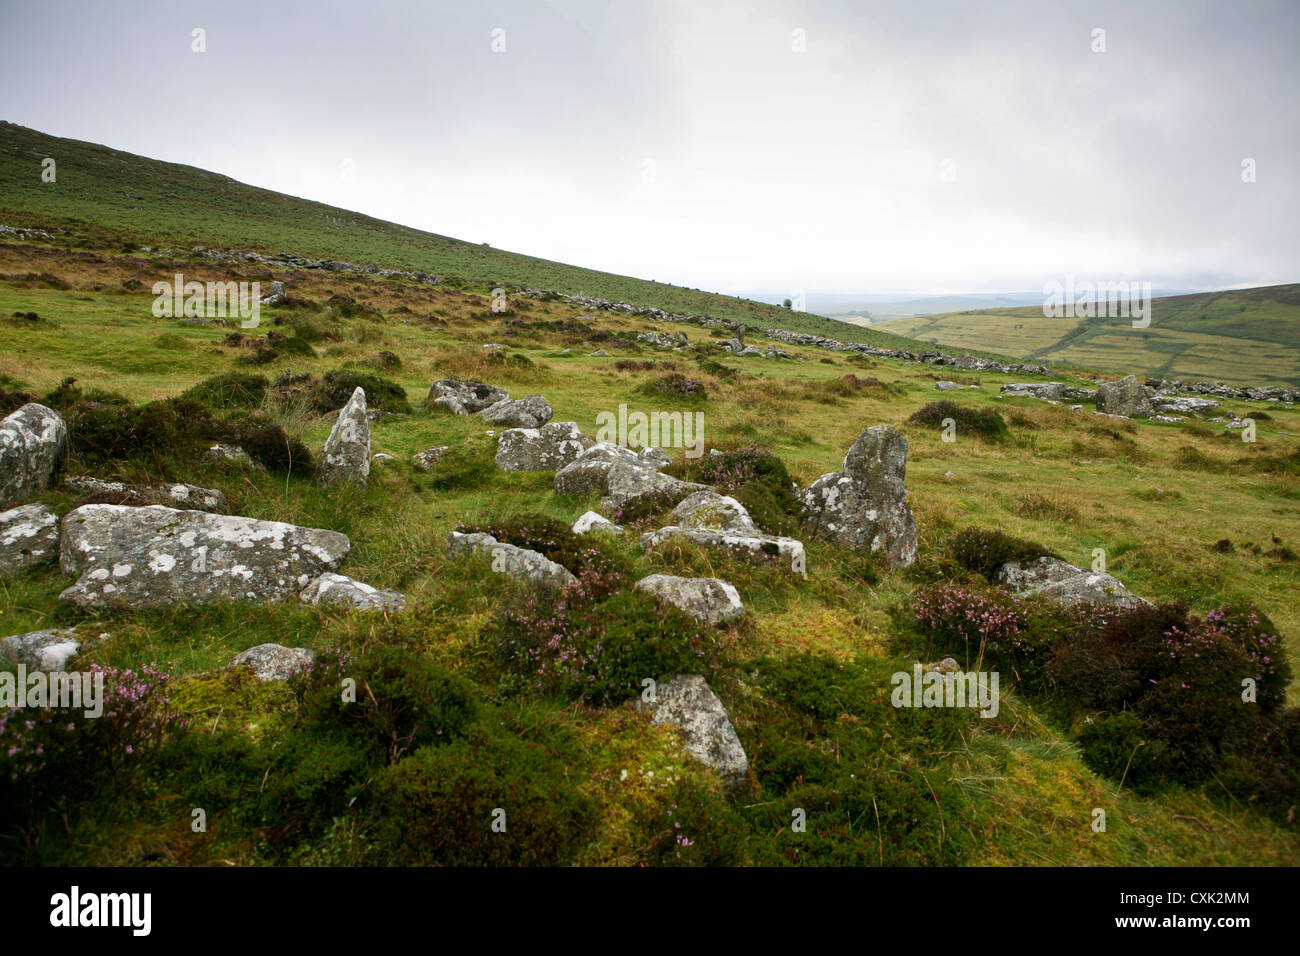 Bronze age hut circle at the Grimspound settlement, view towards Widecombe-in-the-Moor, Dartmoor National Park, UK Stock Photo